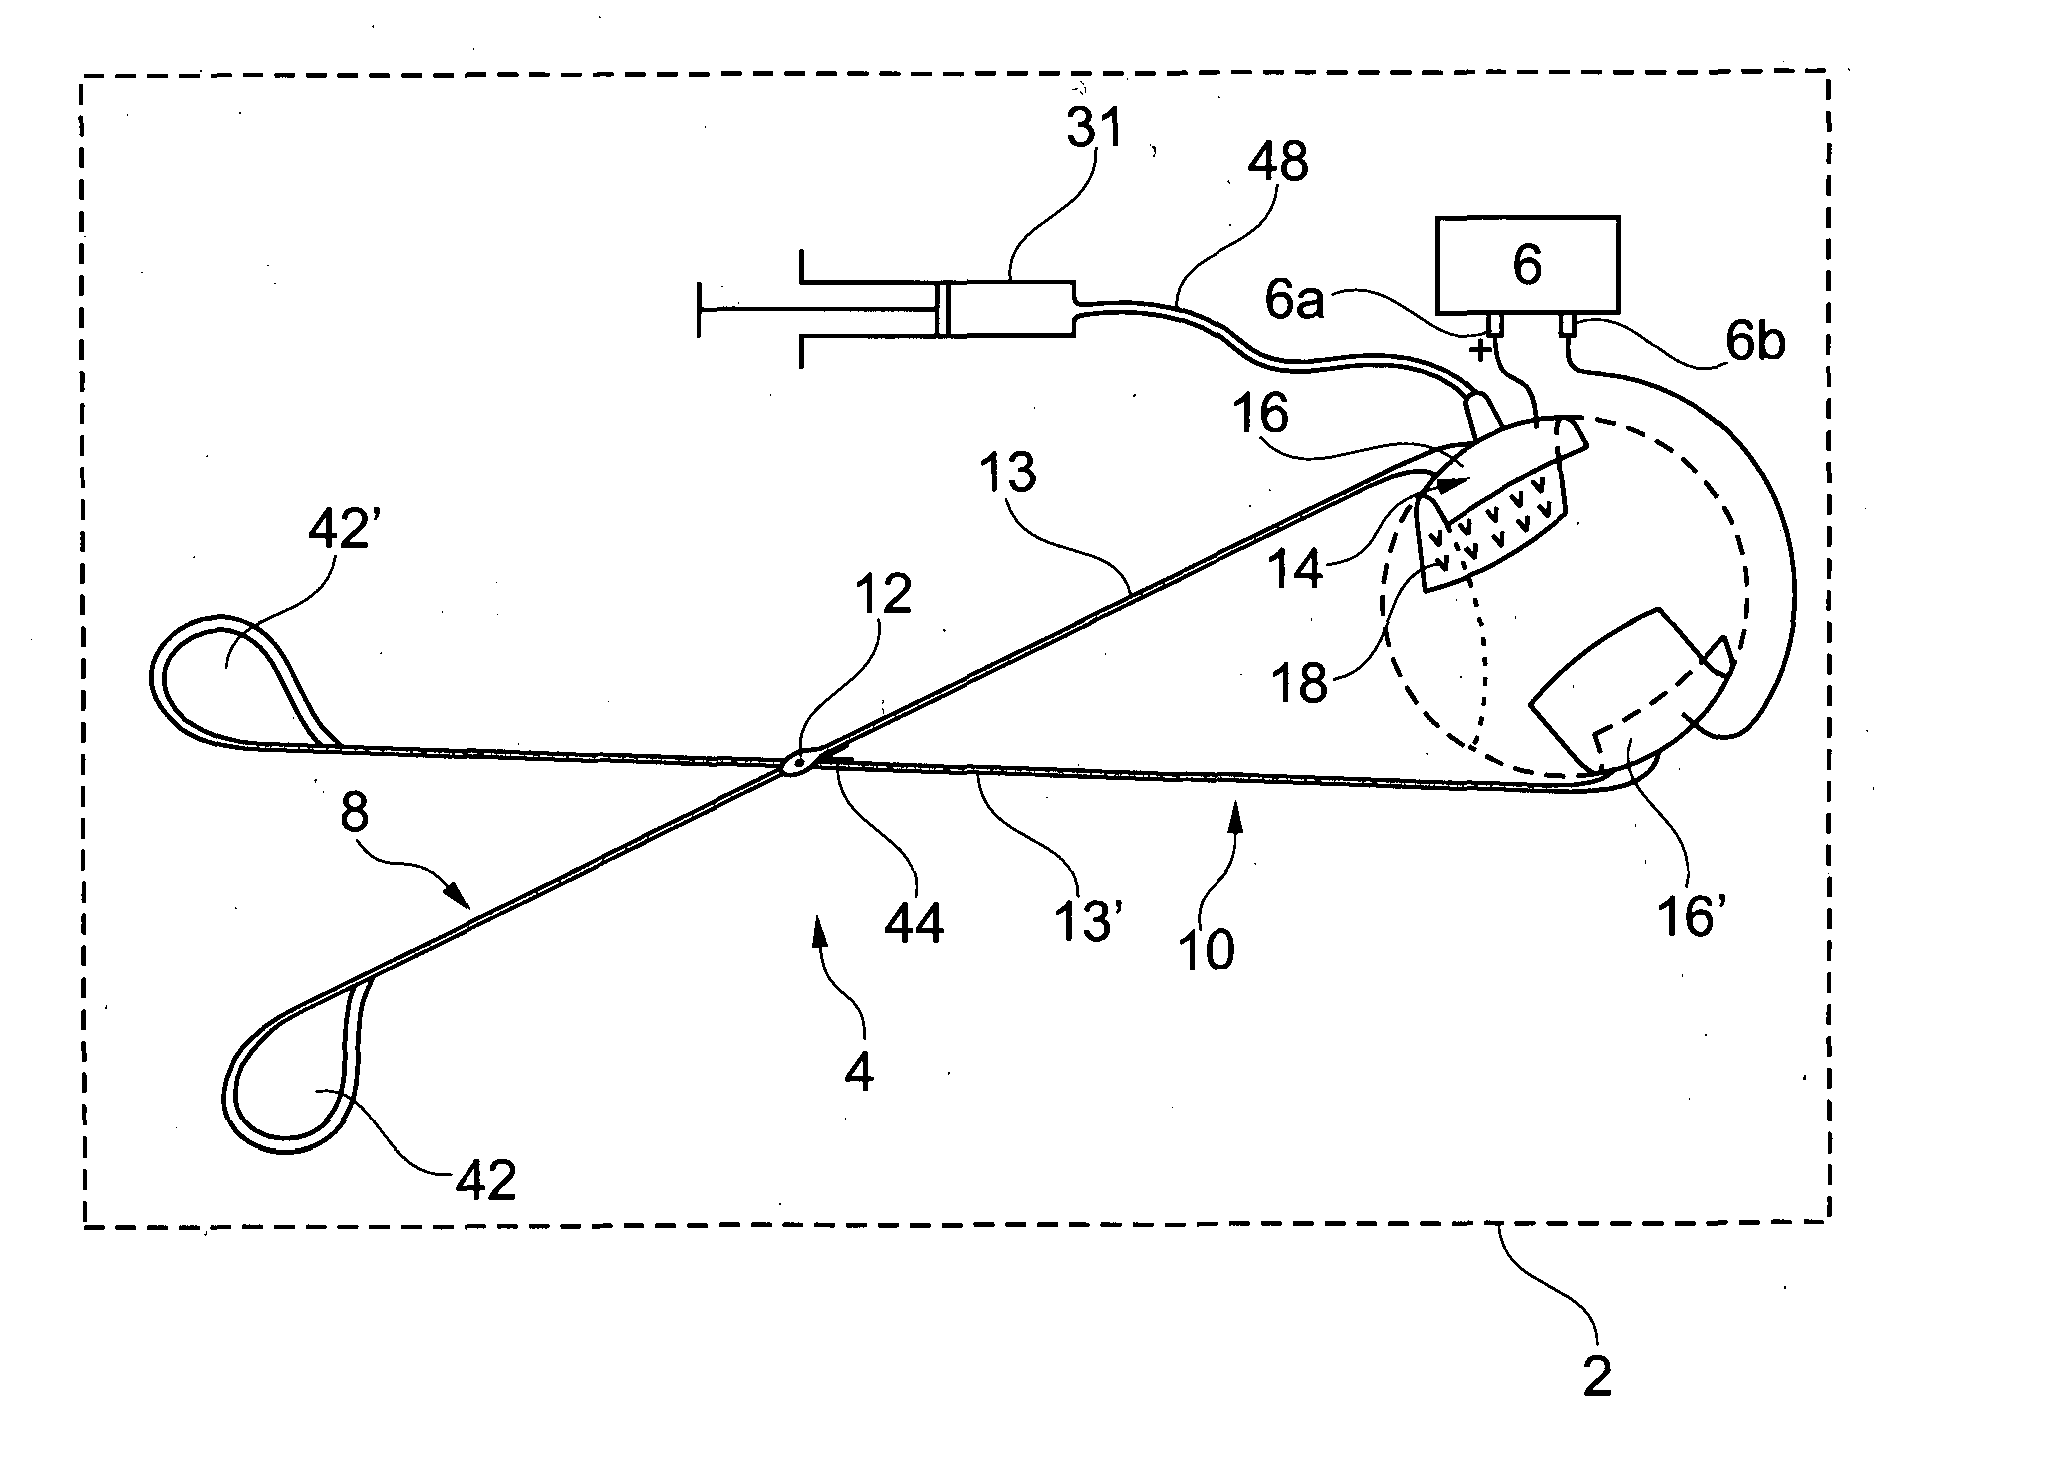 Device for the treatment of an ocular disease